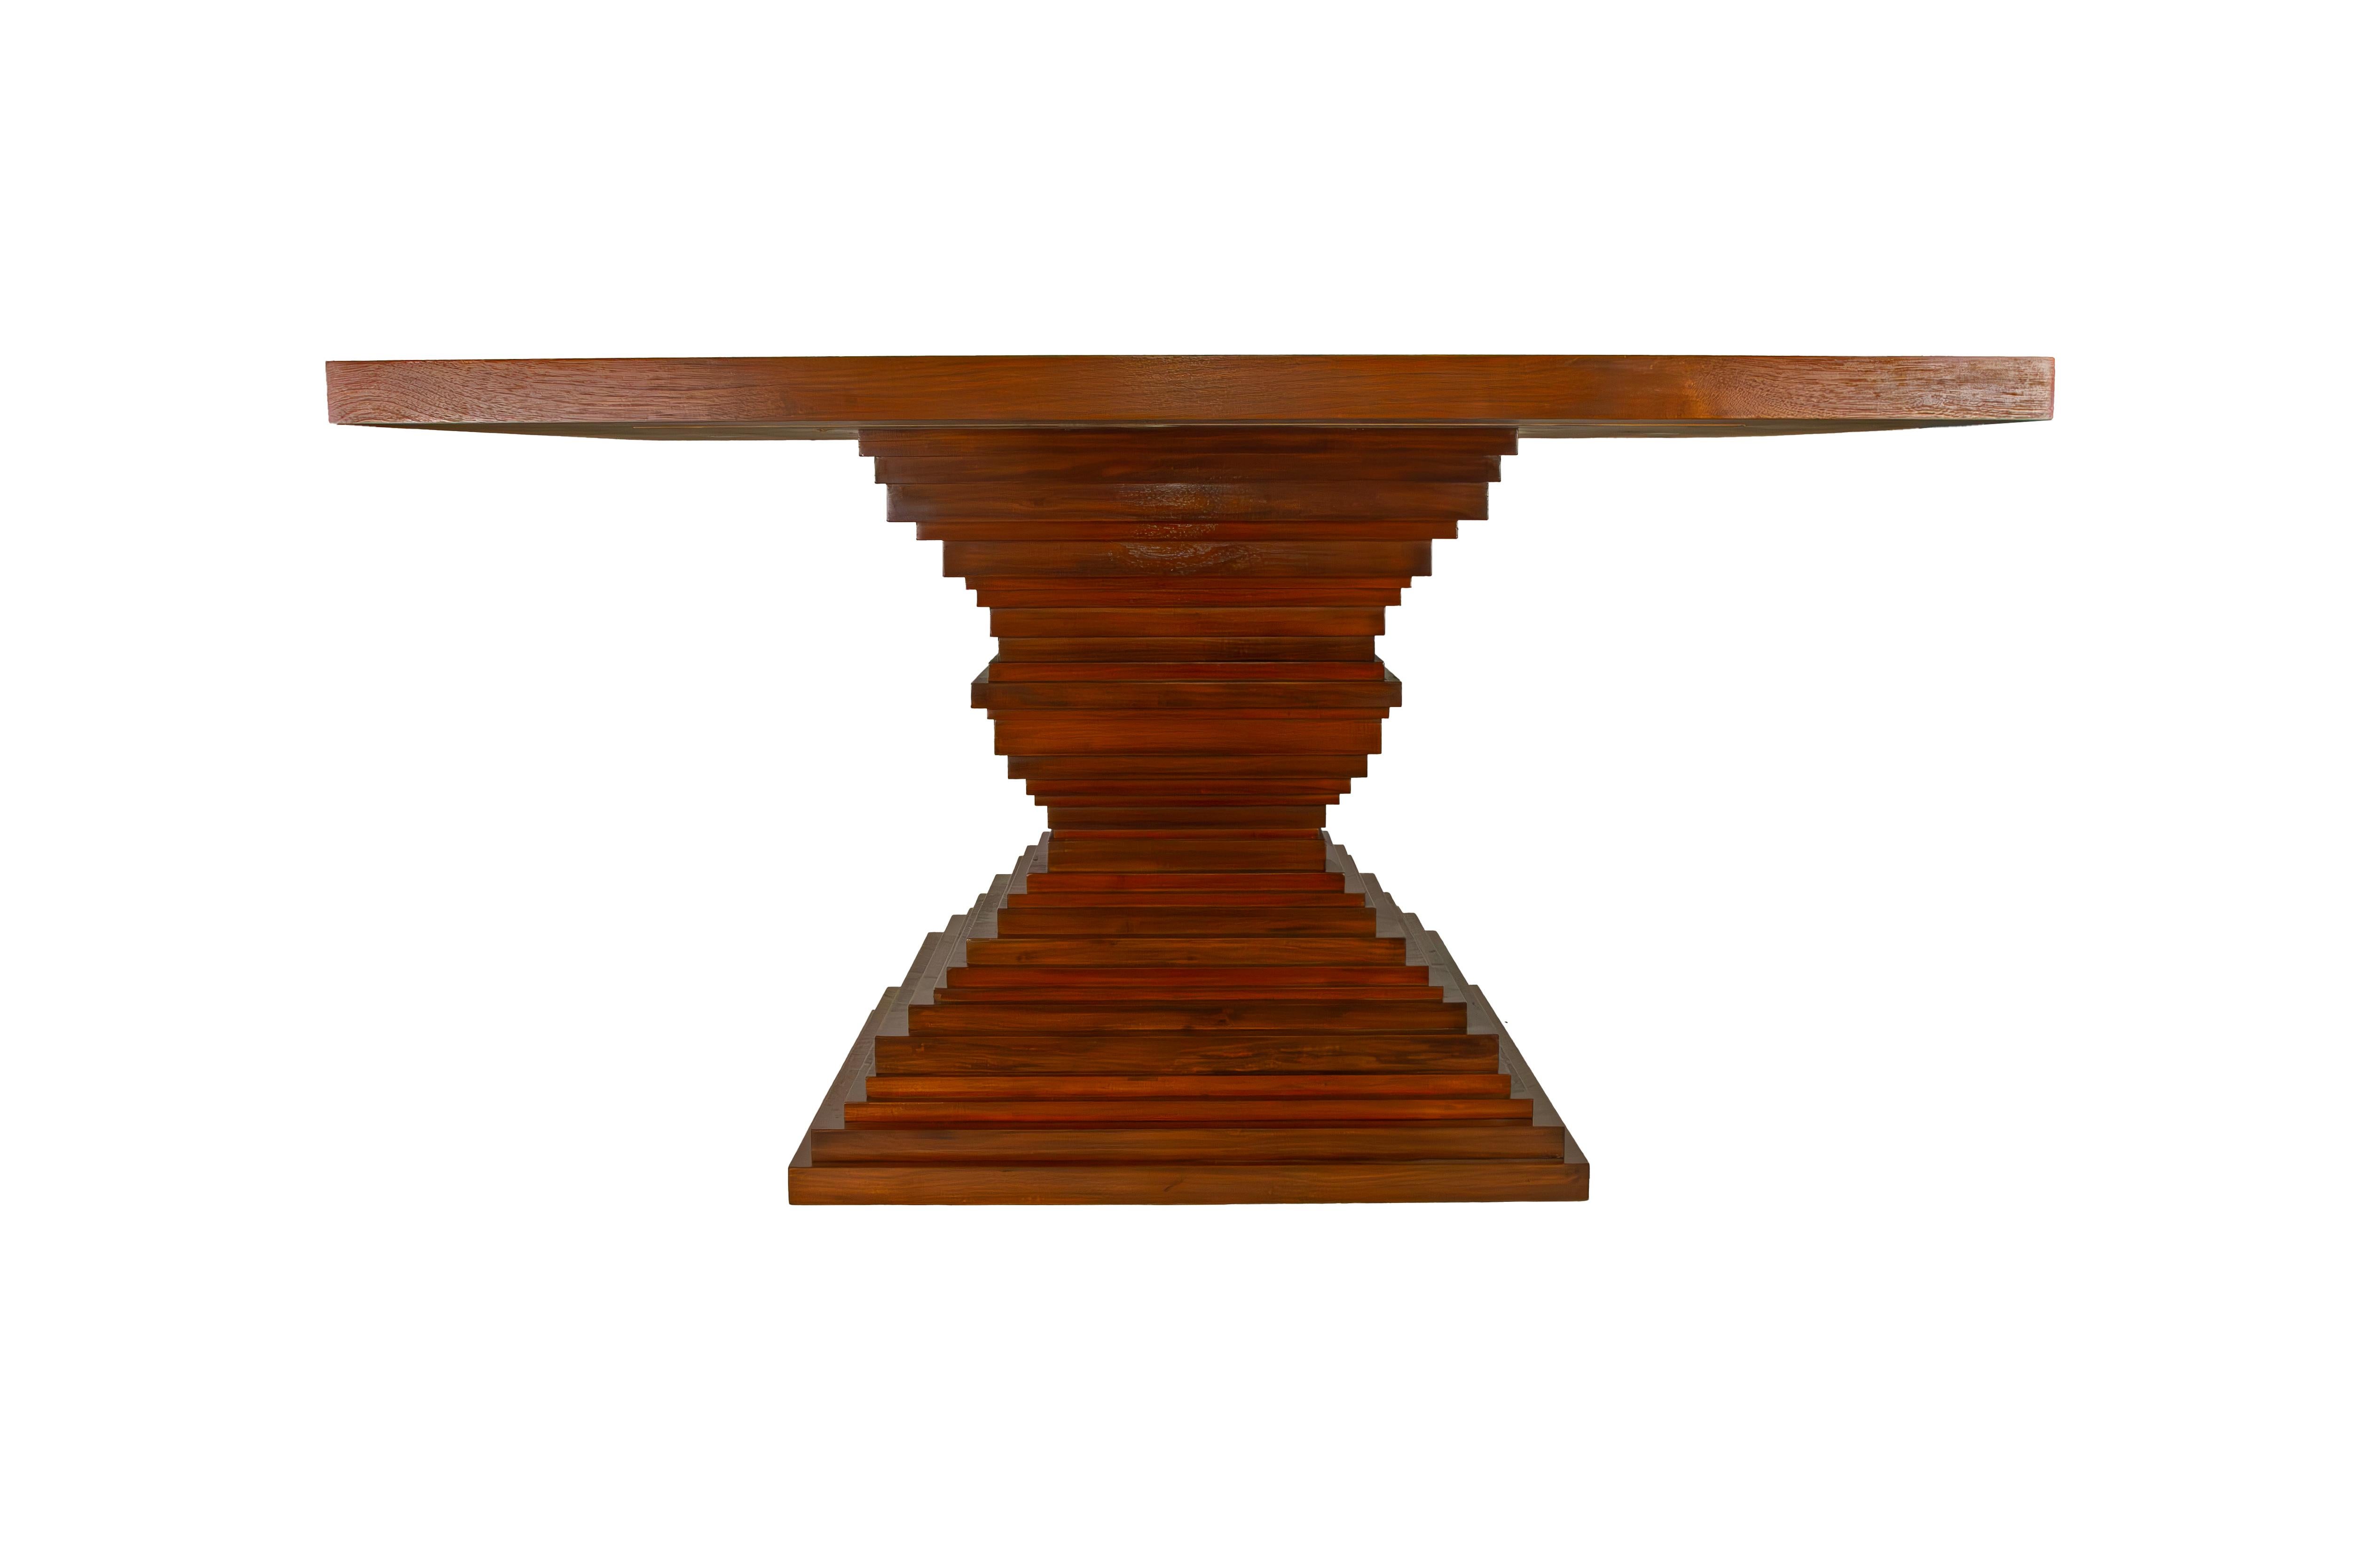 A handcrafted dining table. The original table is artfully composed of 29 individual disks; the impressive top is constructed of multiple sections of walnut or rosewood, creating a splendid sunburst, the table is crafted with traditional joinery in